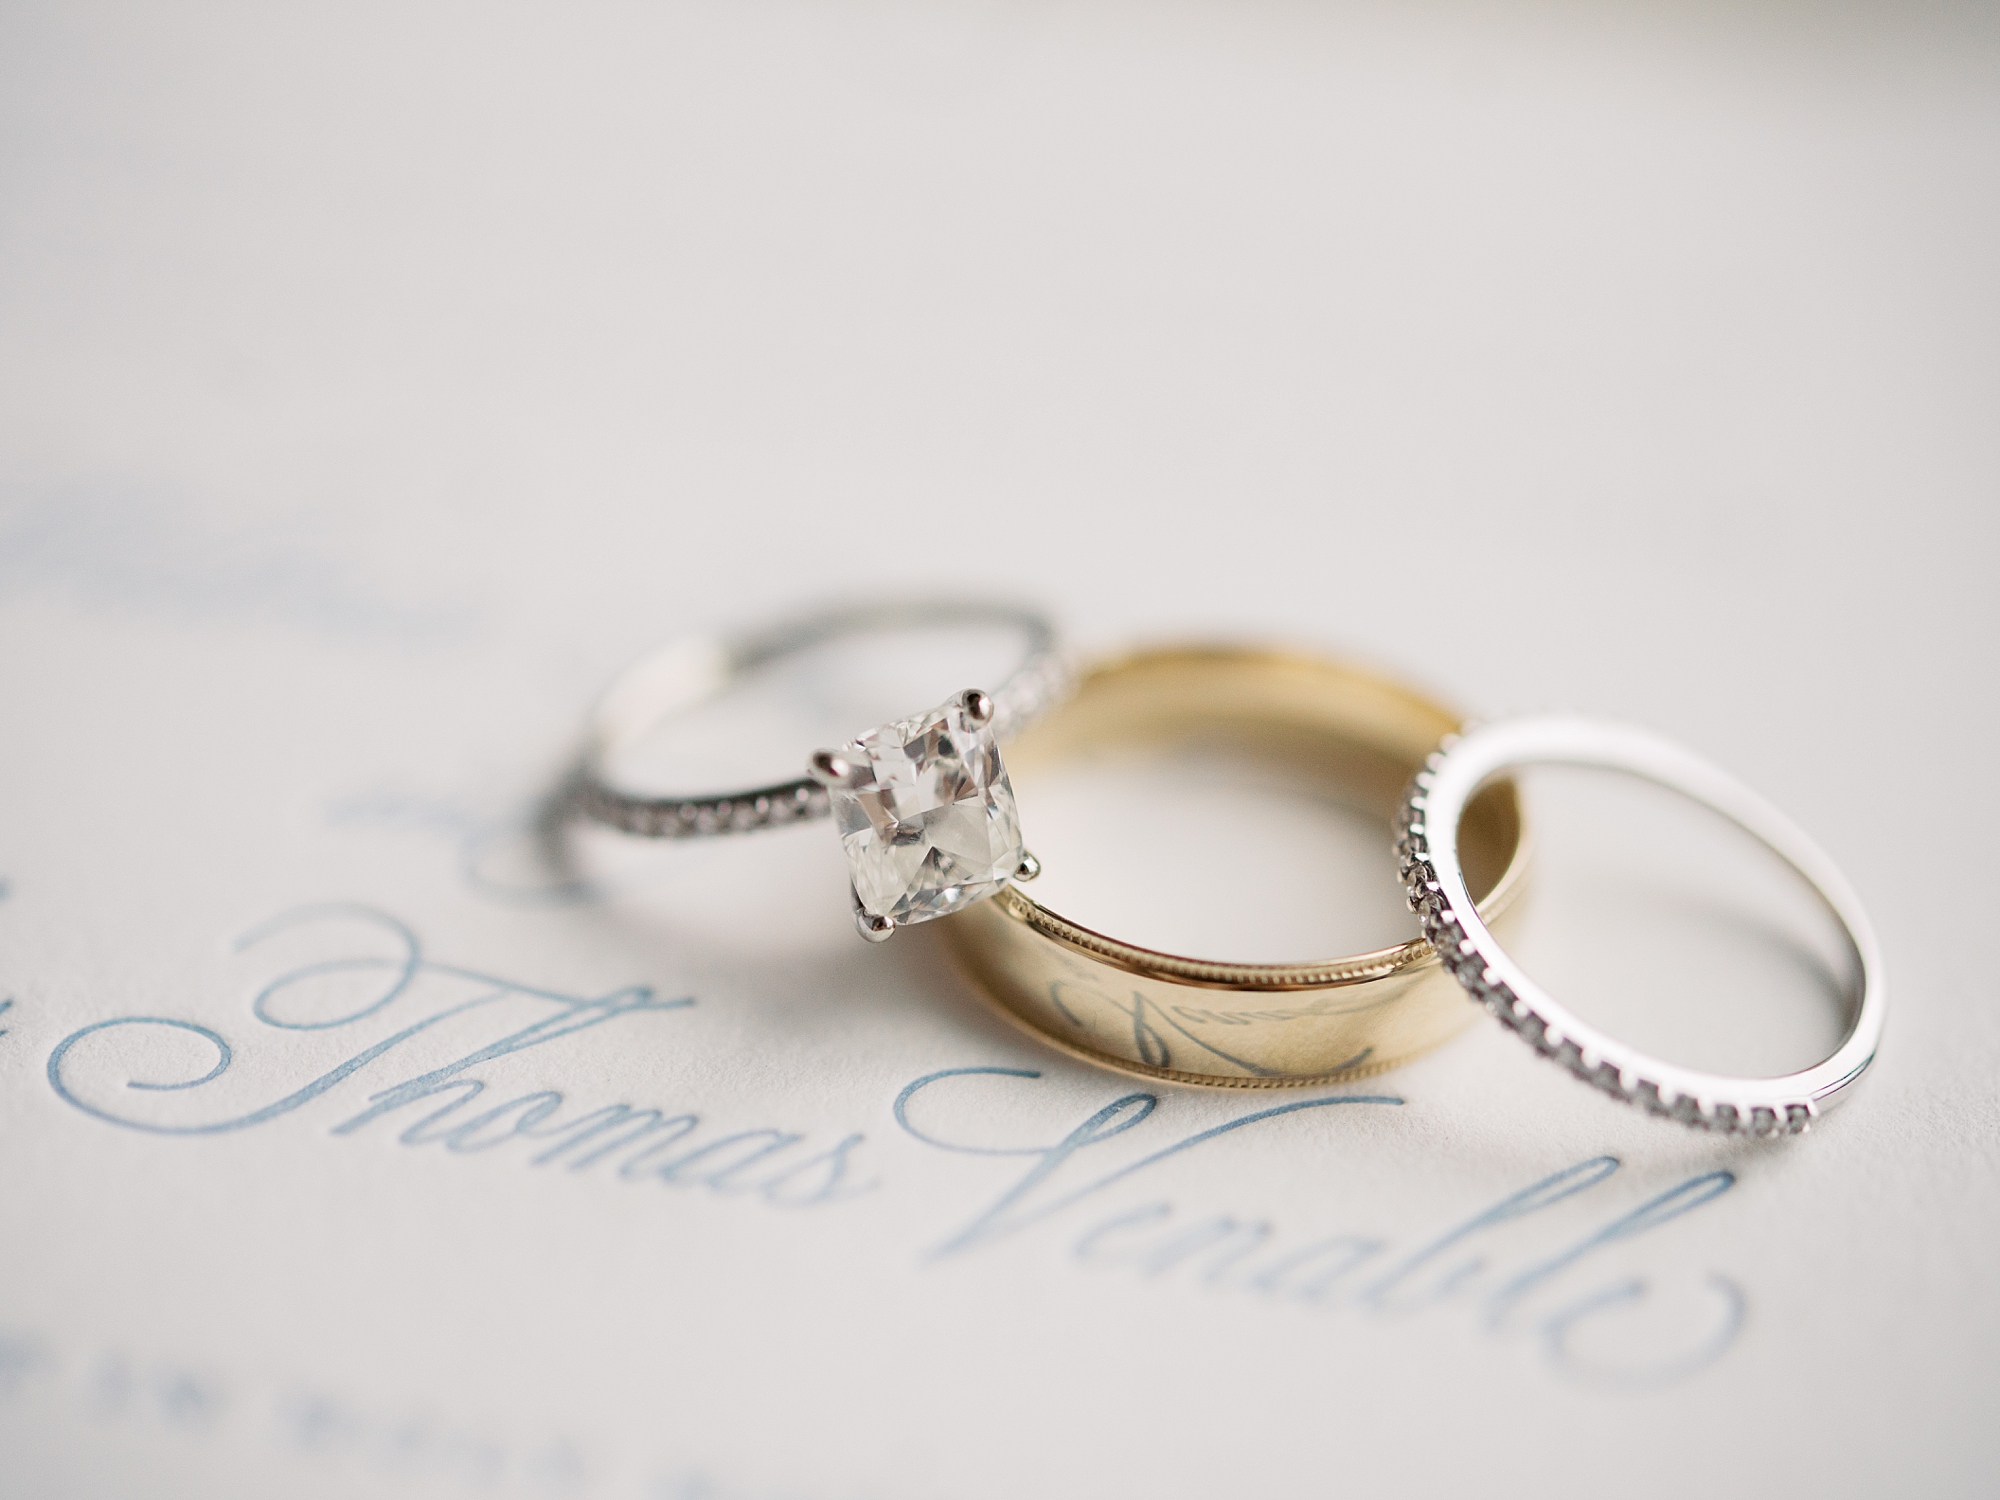 wedding rings lay on invitation for New Orleans wedding 